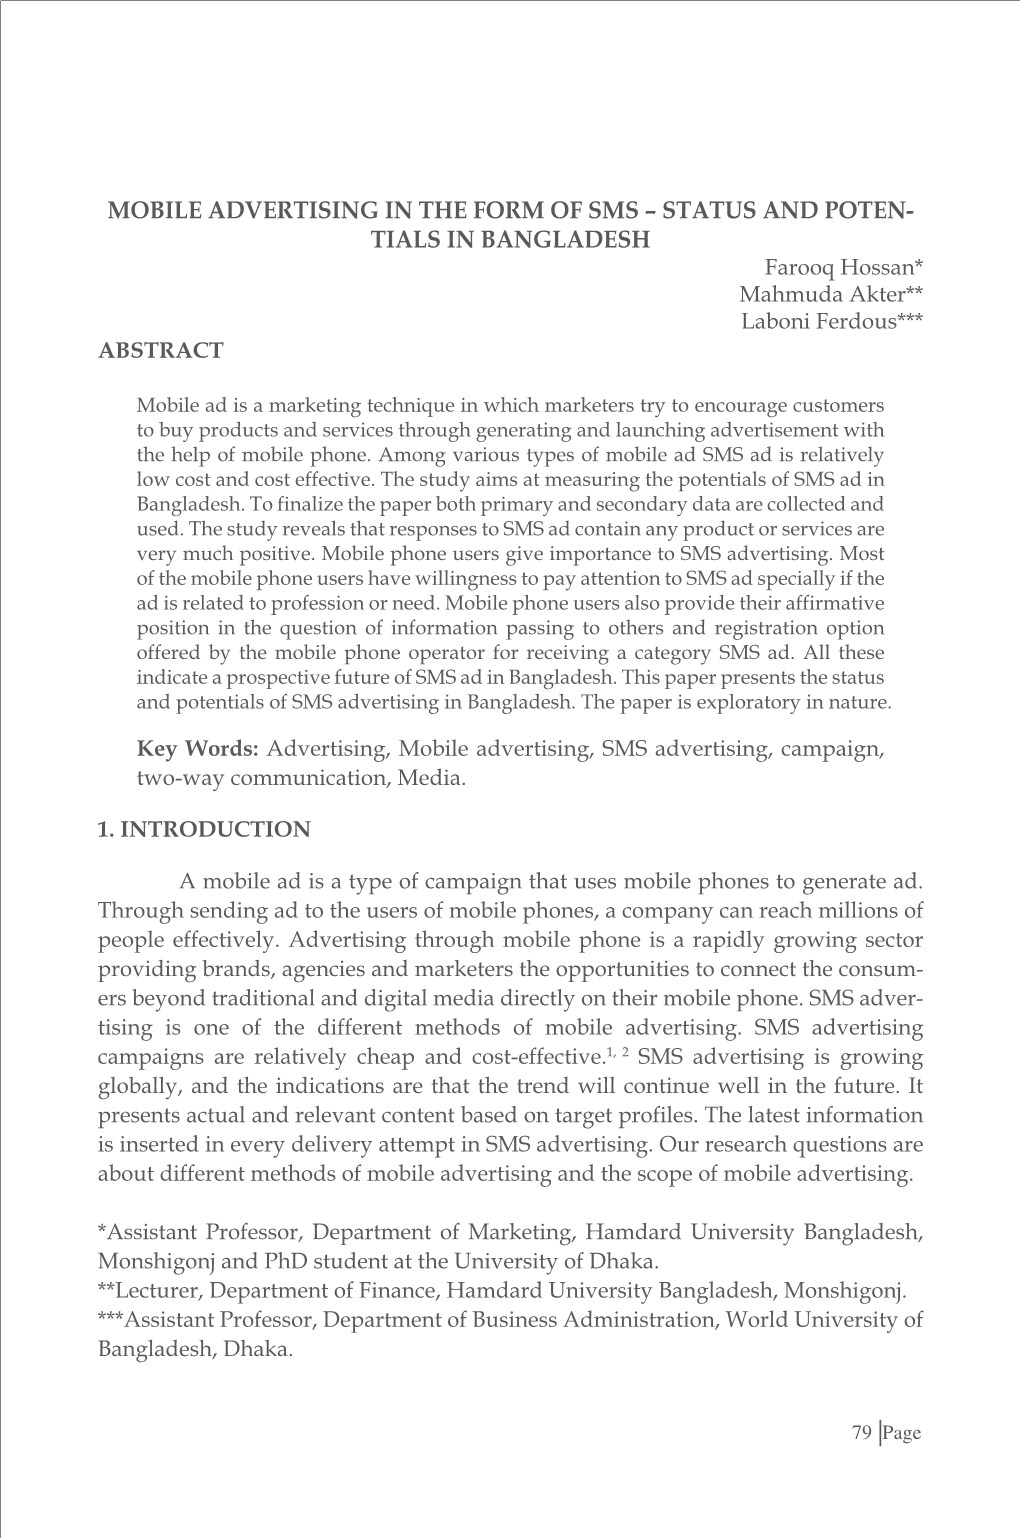 Mobile Advertising in the Form of SMS – Status and Potentials in Bangladesh